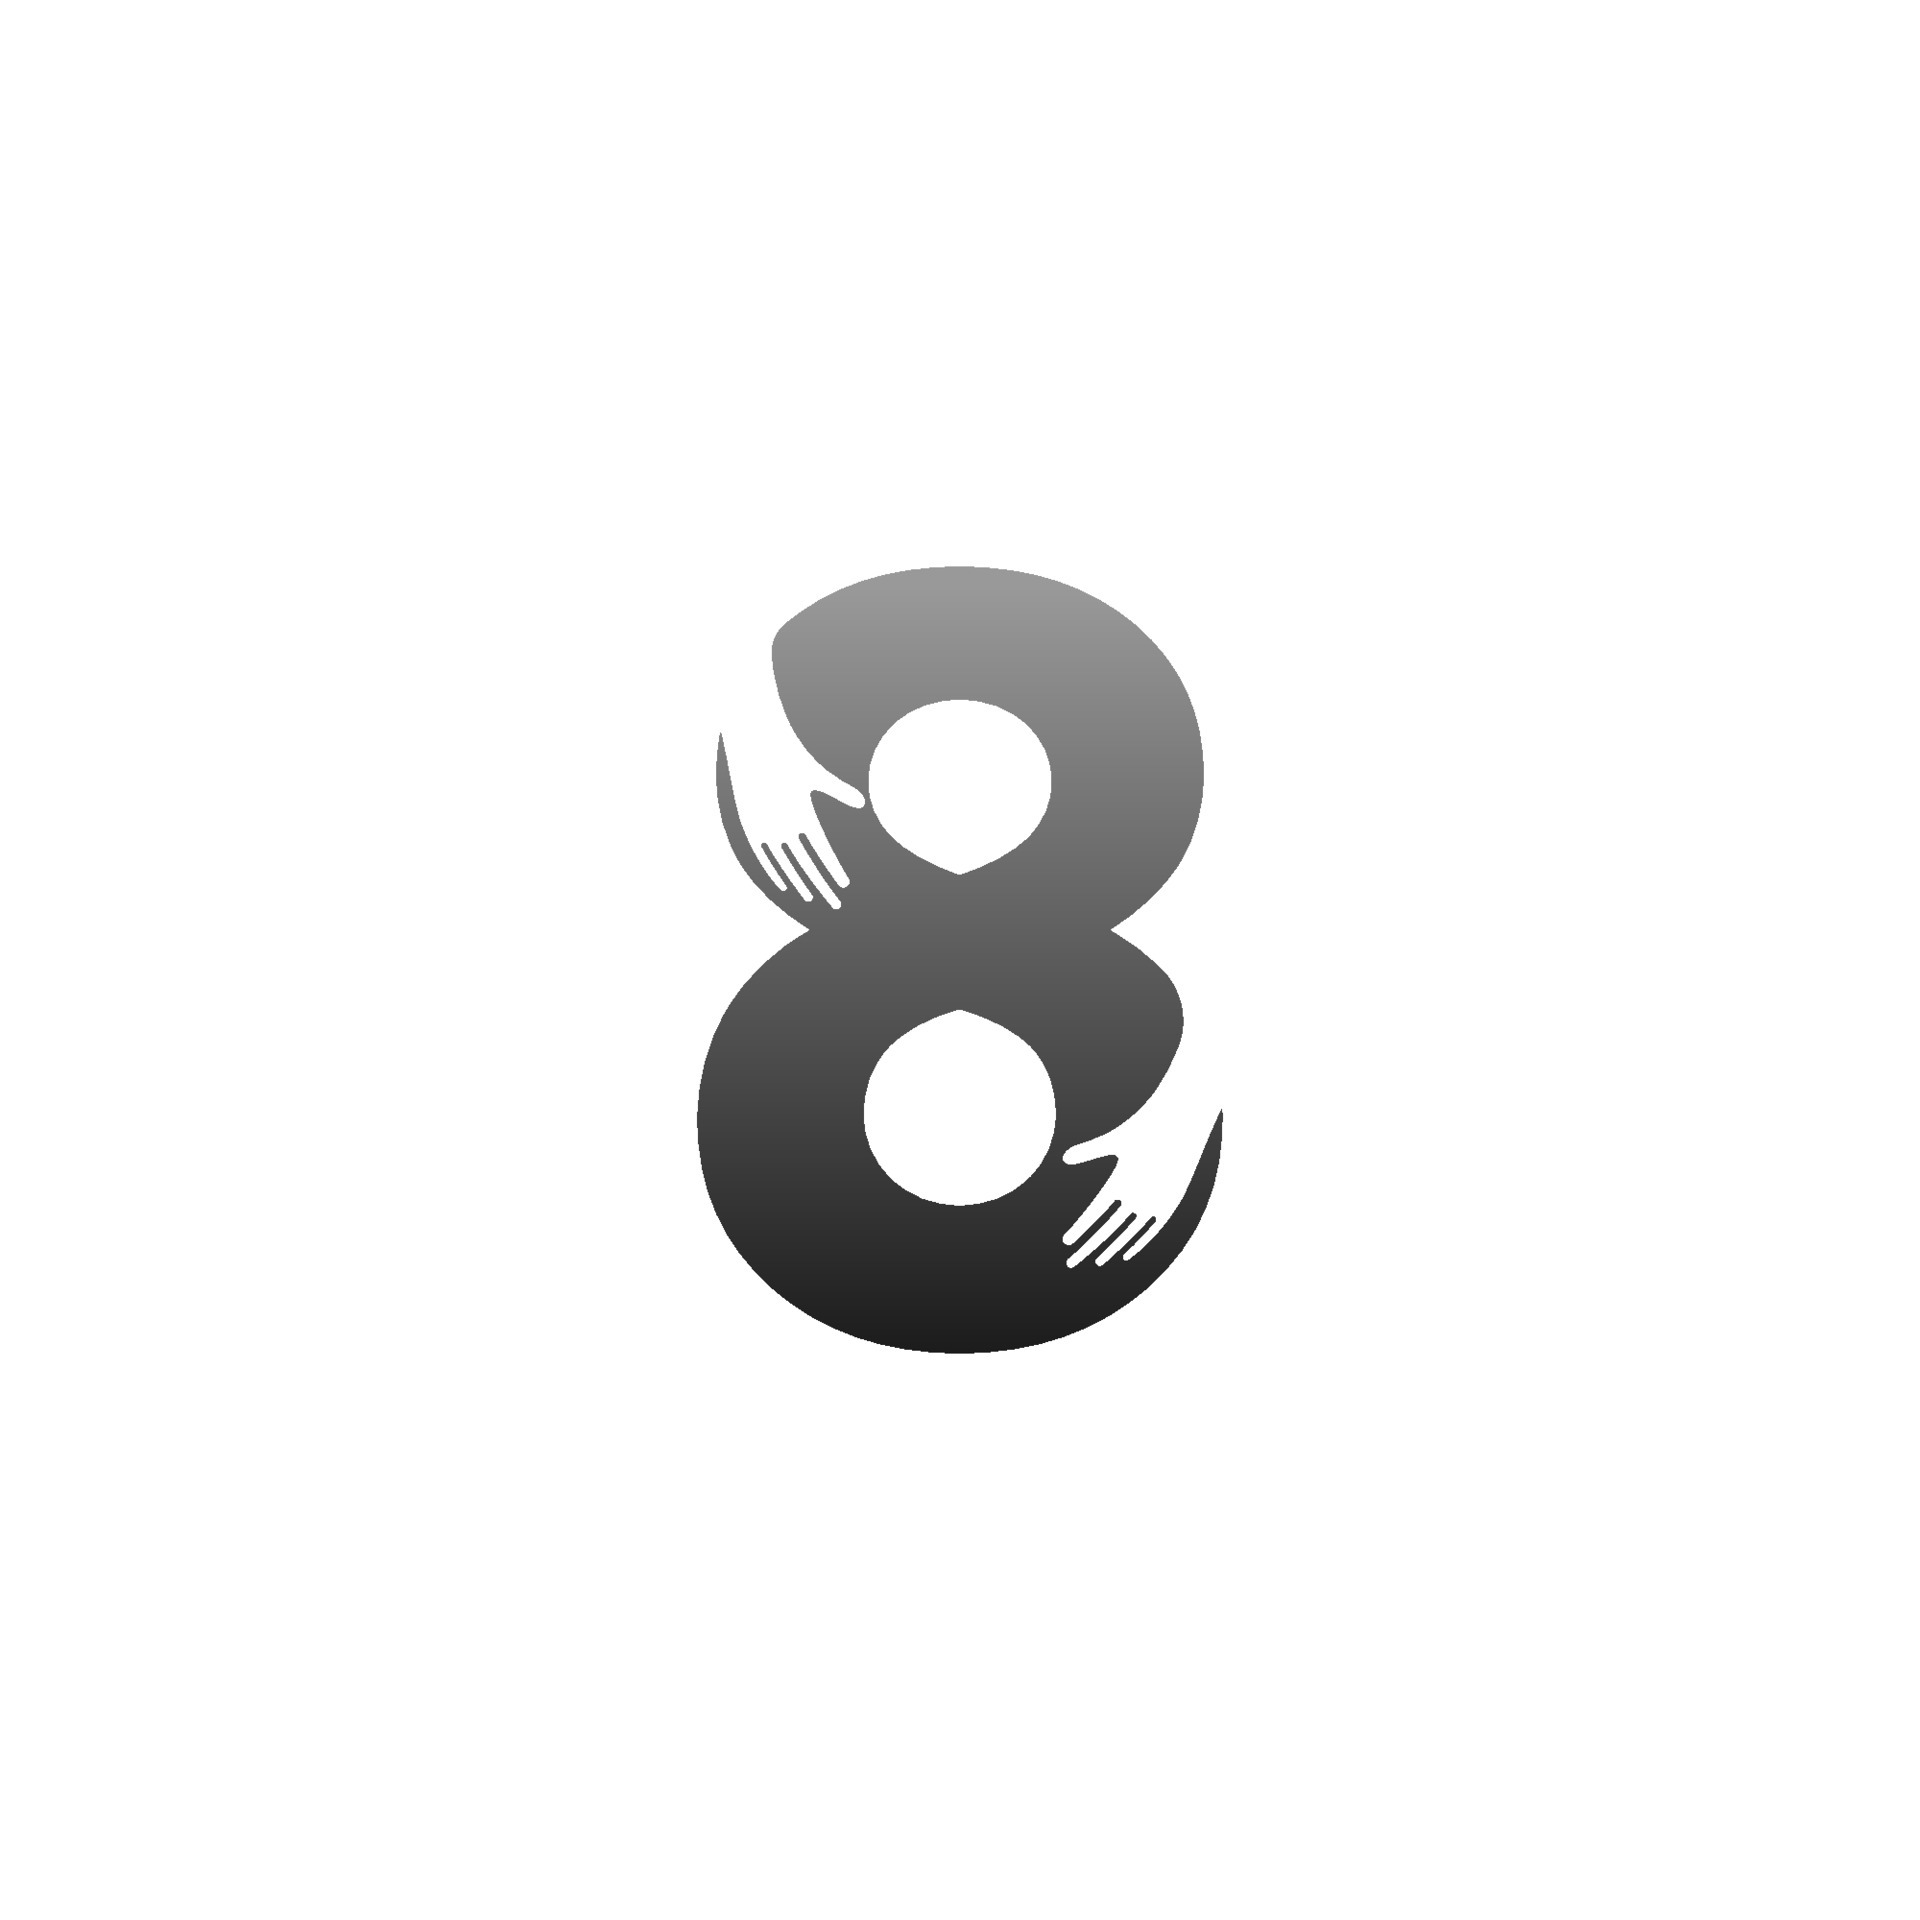 Number 8 logo icon with hand design symbol template 6830527 Vector Art ...